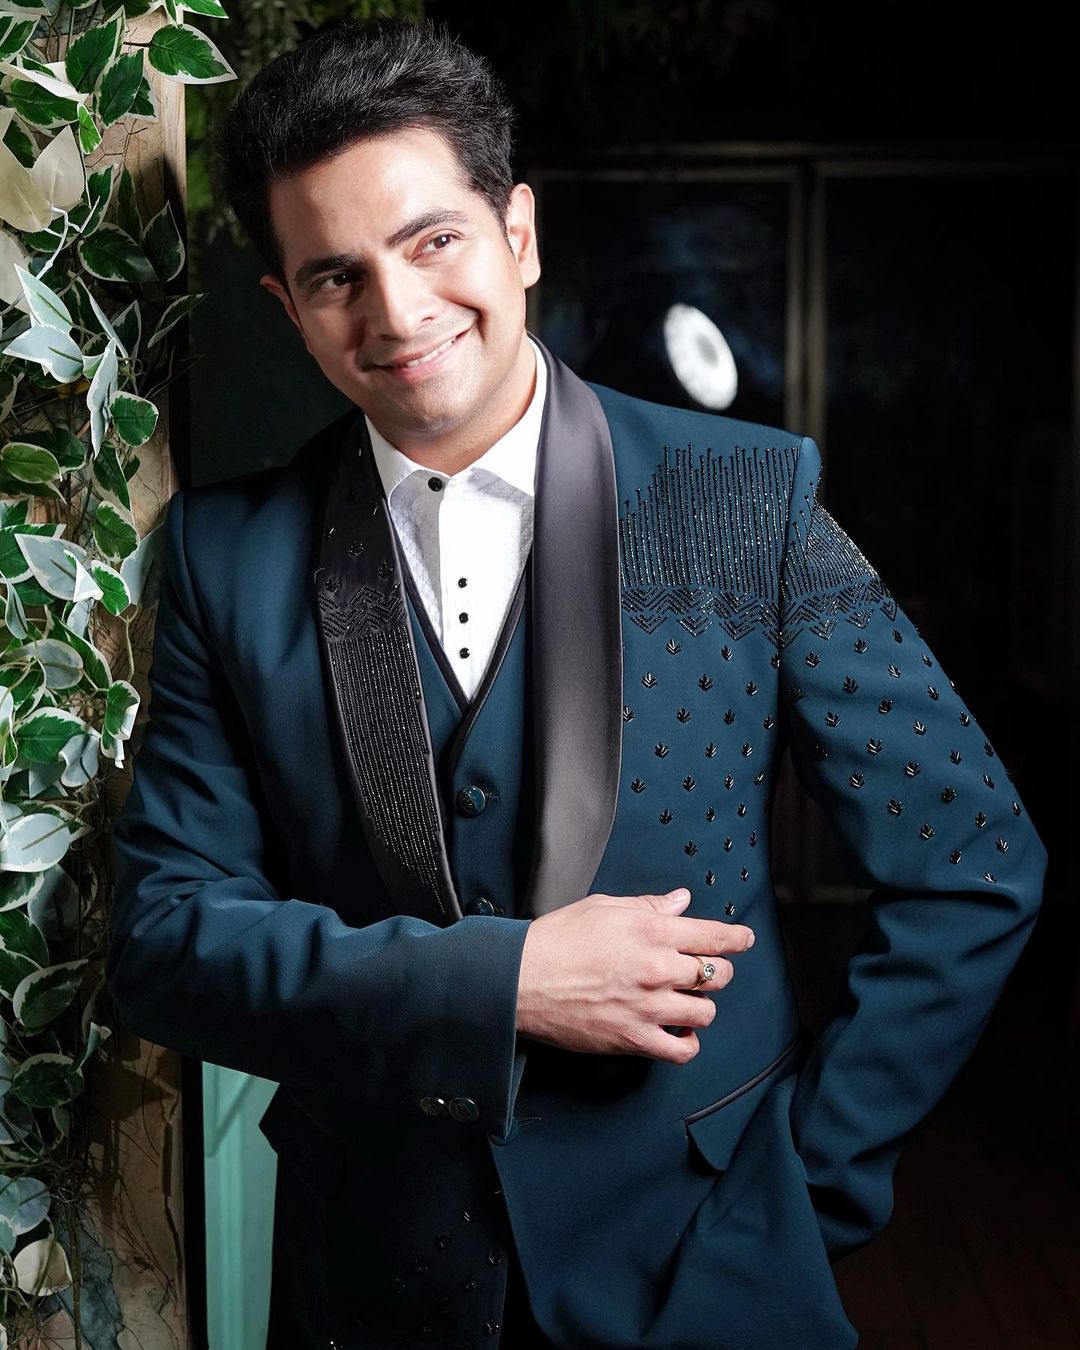 YRHKK Fame Karan Mehra Says Still People Recognize Me As Naitik! I Will Create Another Milestone By Connecting With The Audience As Manoj In Mehndi Wala Ghar